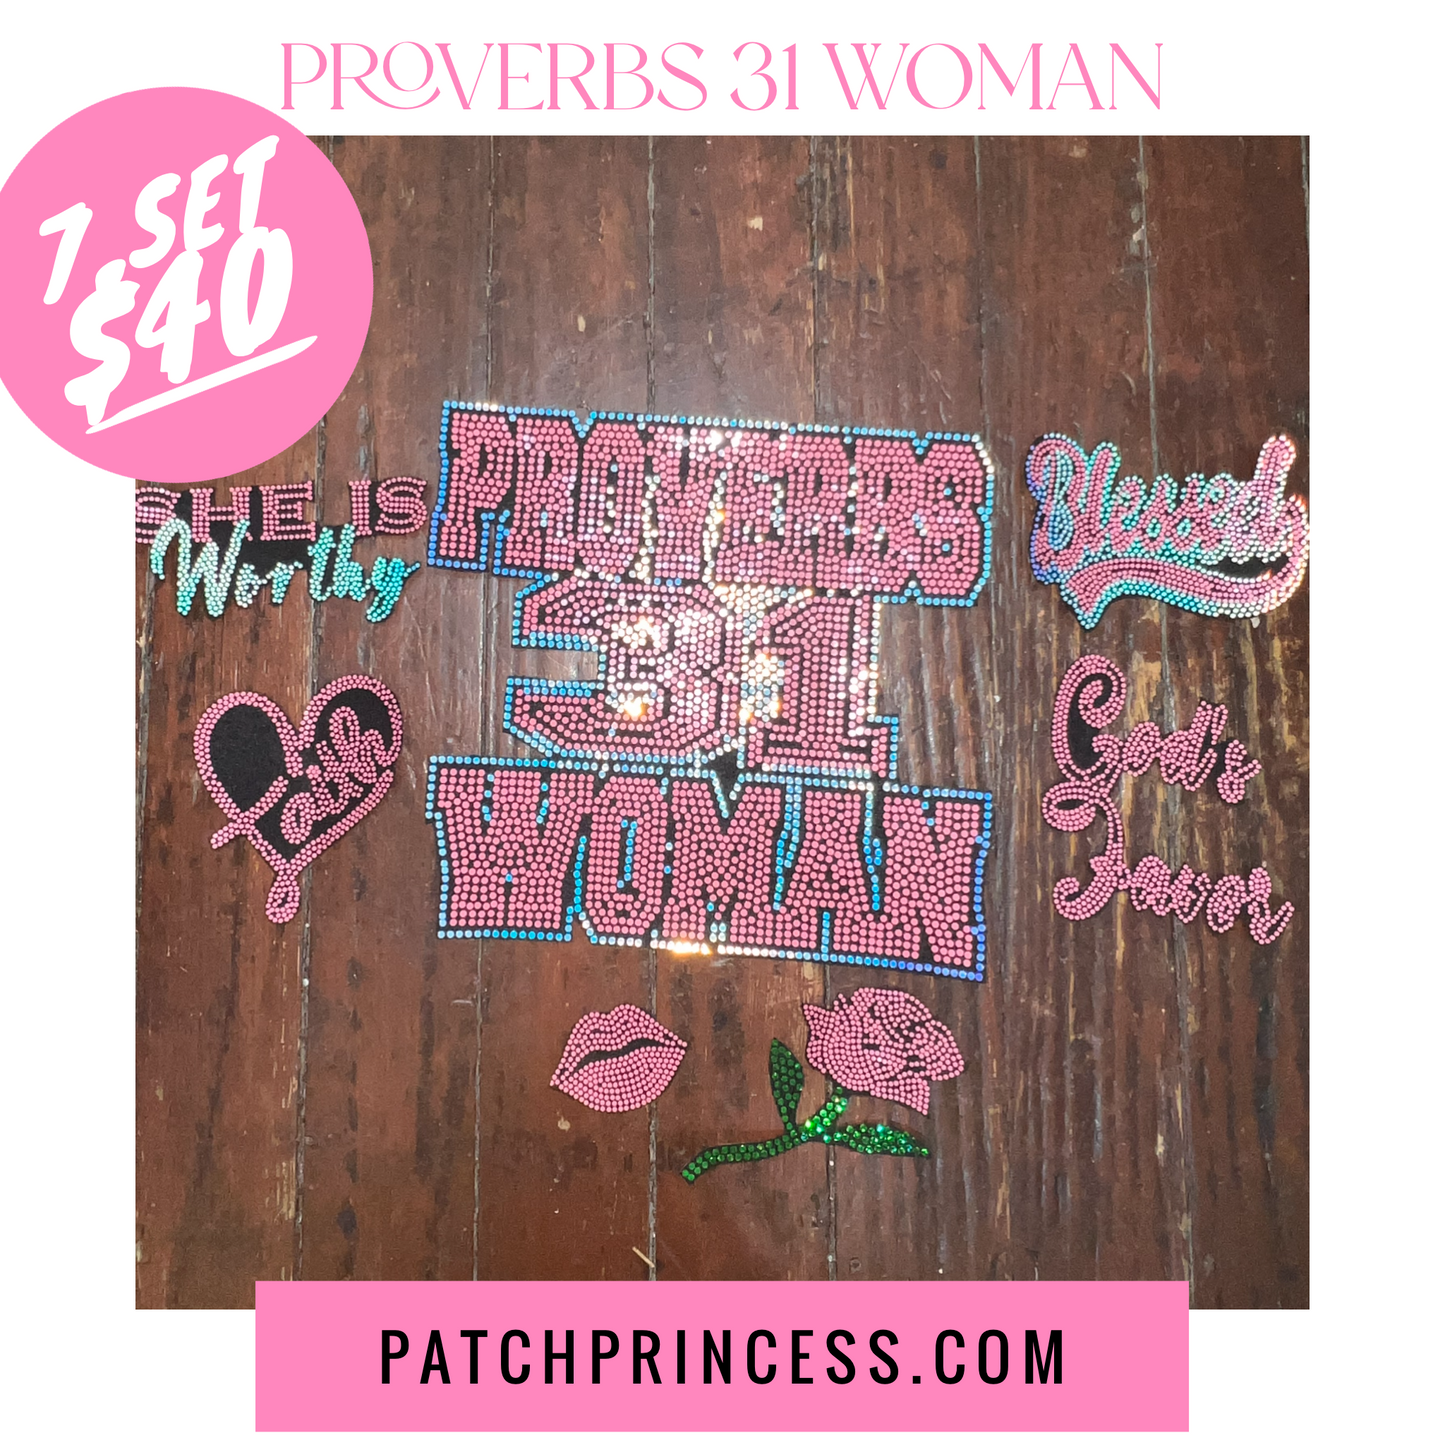 PROVERBS 31 WOMAN 7 PATCH SET